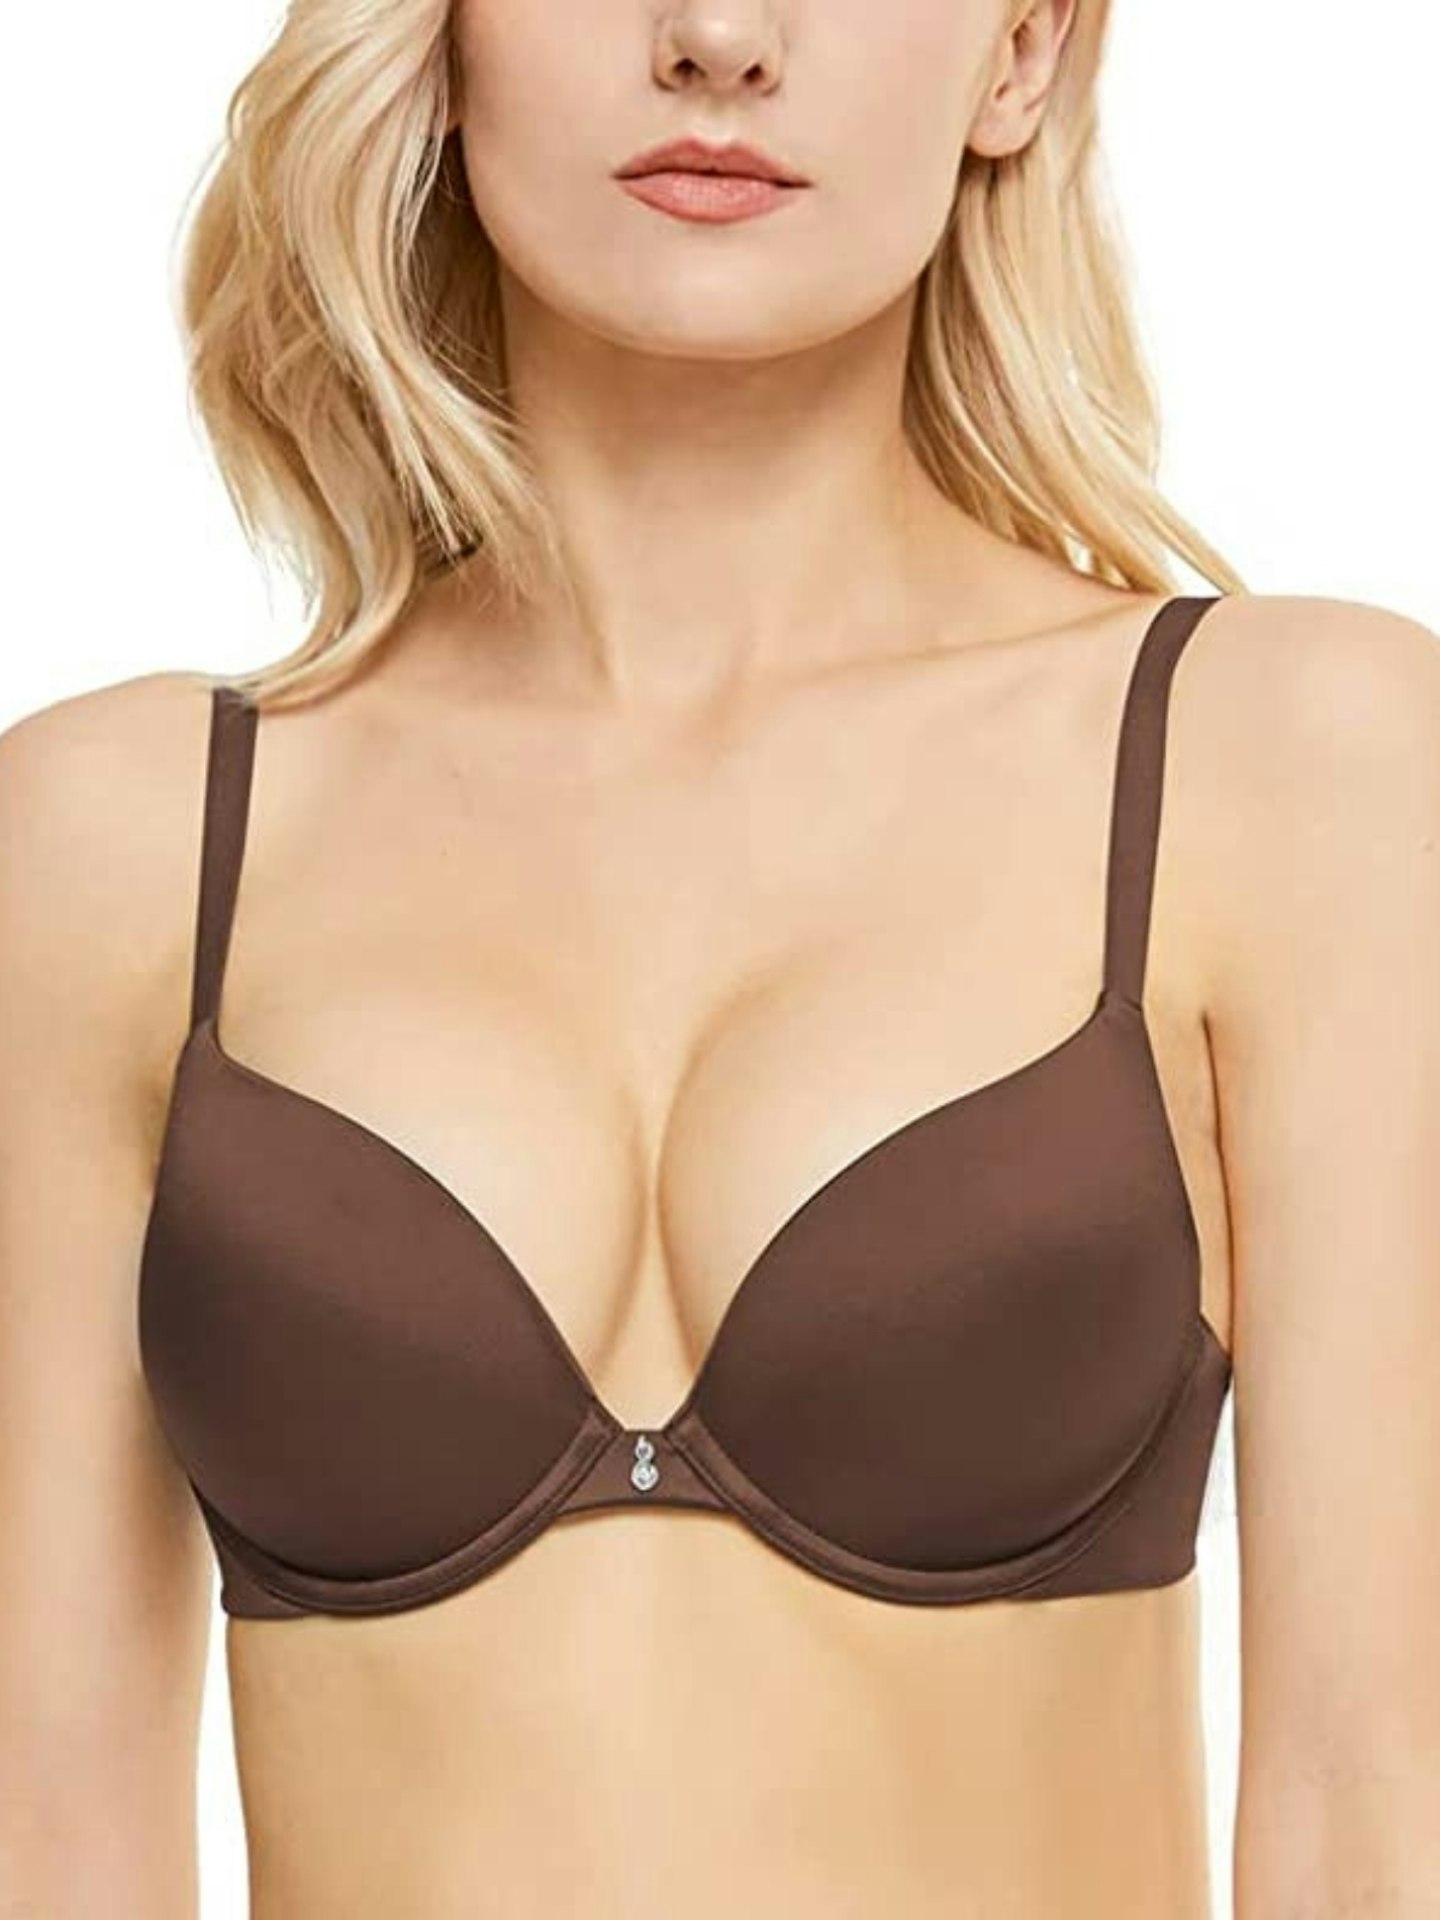 Victoria's Secret Very Sexy Push-Up Bra 34DD Size undefined - $14 - From  Autumn